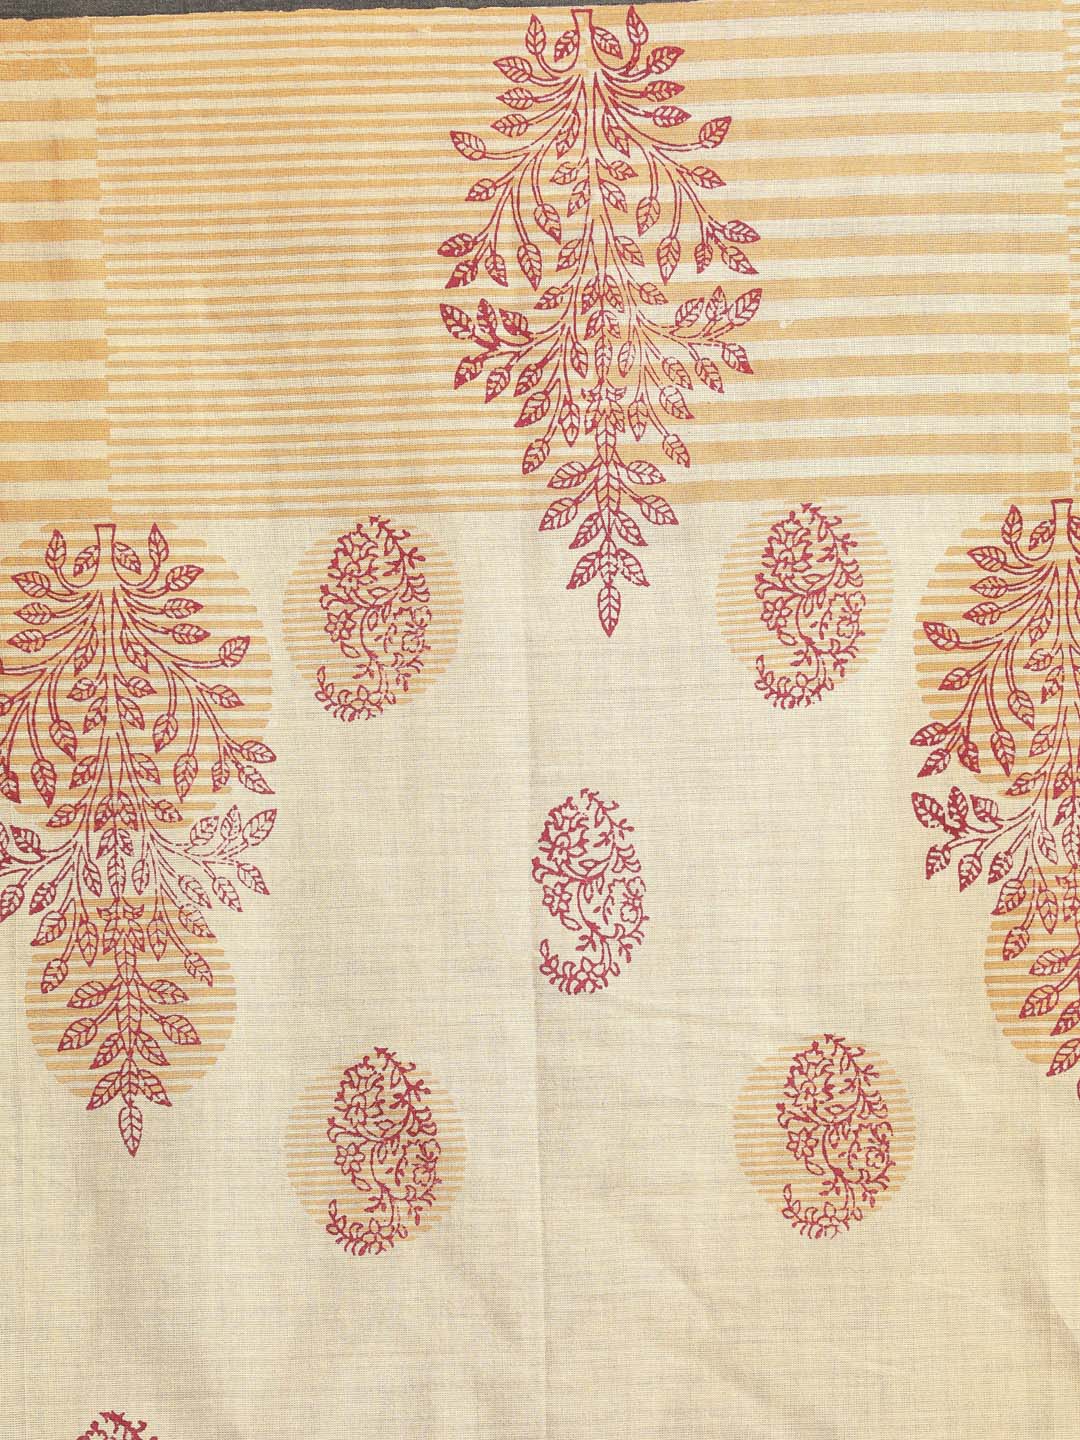 Indethnic Printed Pure Cotton Saree in Maroon - Saree Detail View